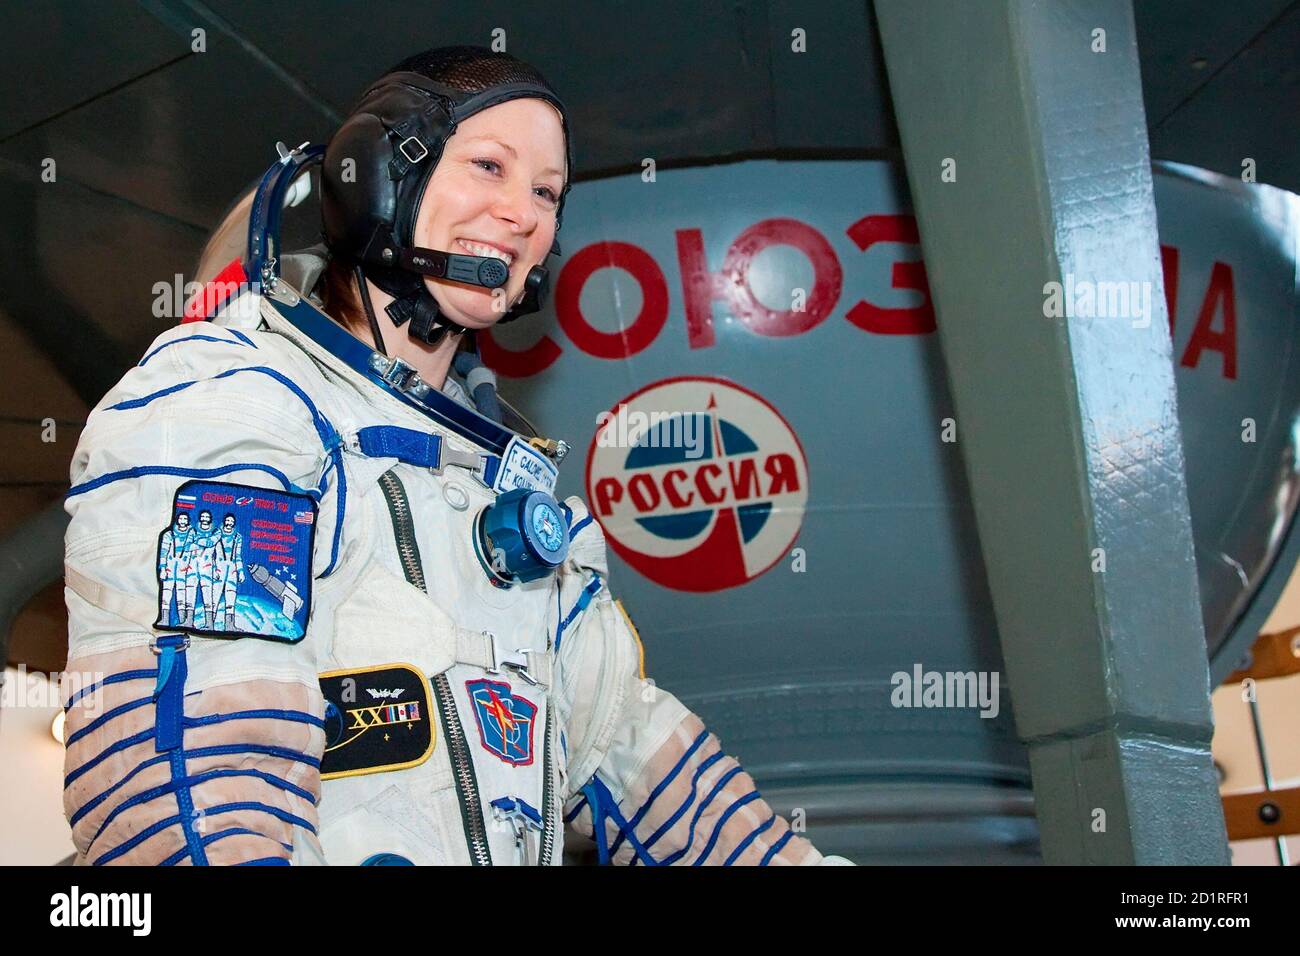 U.S. astronaut Tracy Caldwell Dyson takes part in an examination at the Star City space centre outside Moscow March 12, 2010. Caldwell Dyson, Russia's cosmonauts Alexander Skvortsov and Mikhail Kornienko are scheduled